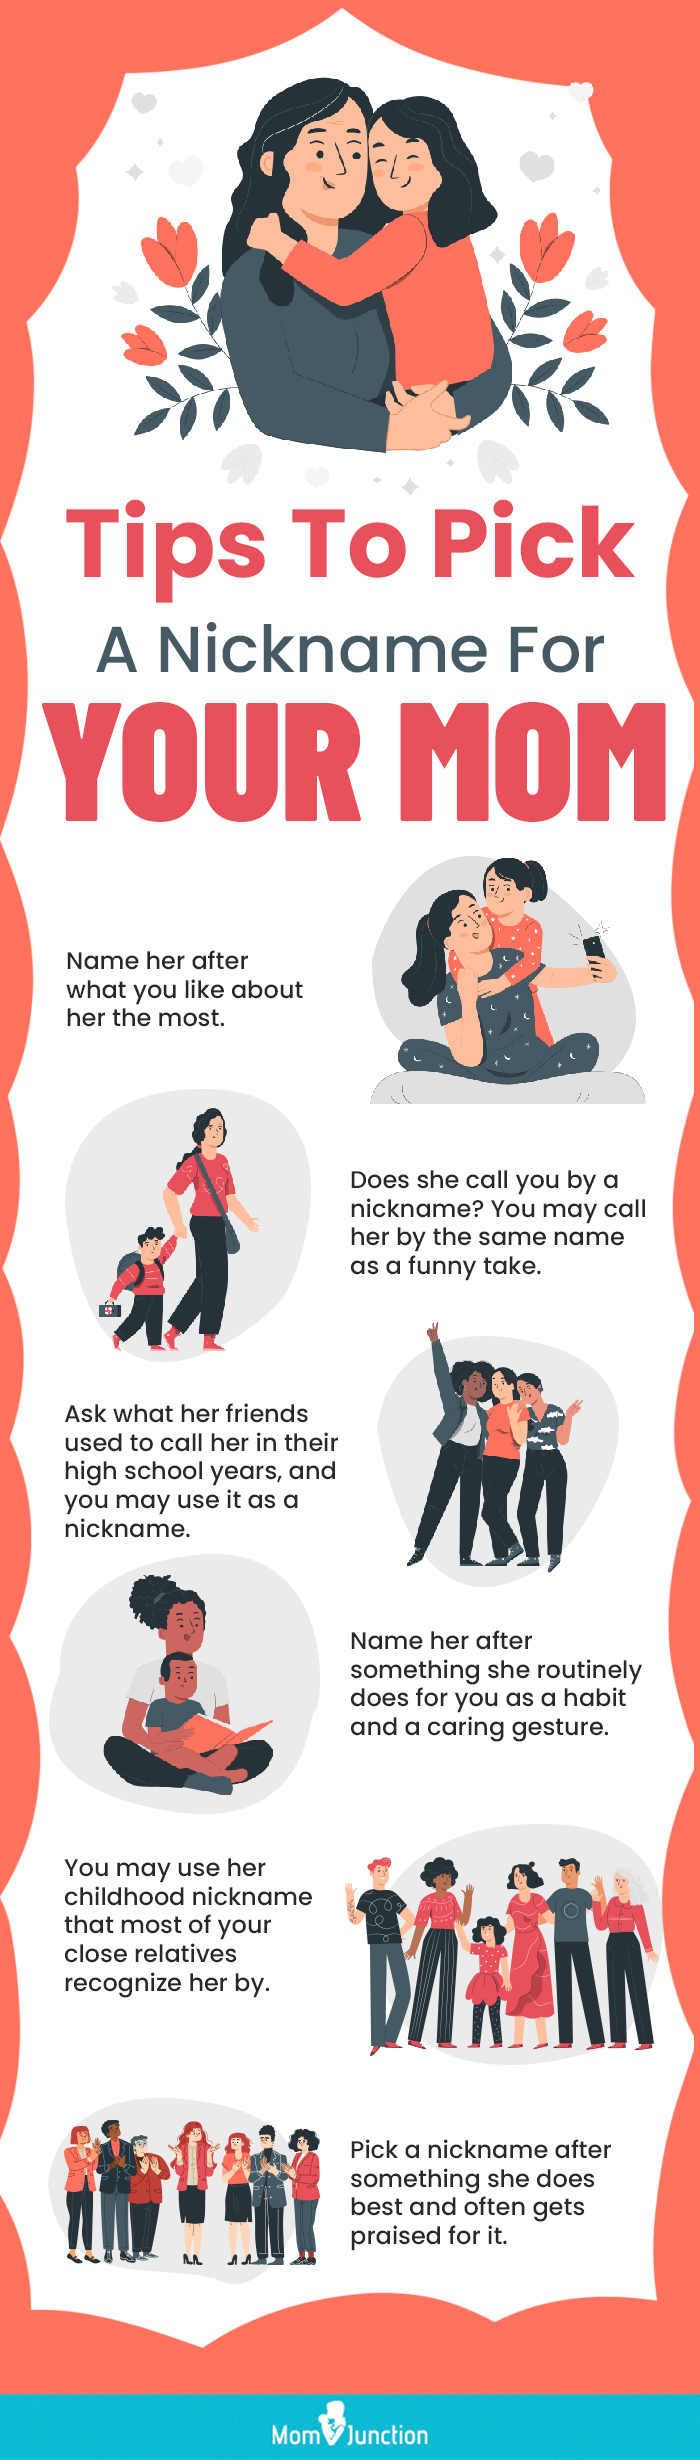 tips to pick a nickname for your mom [infographic]